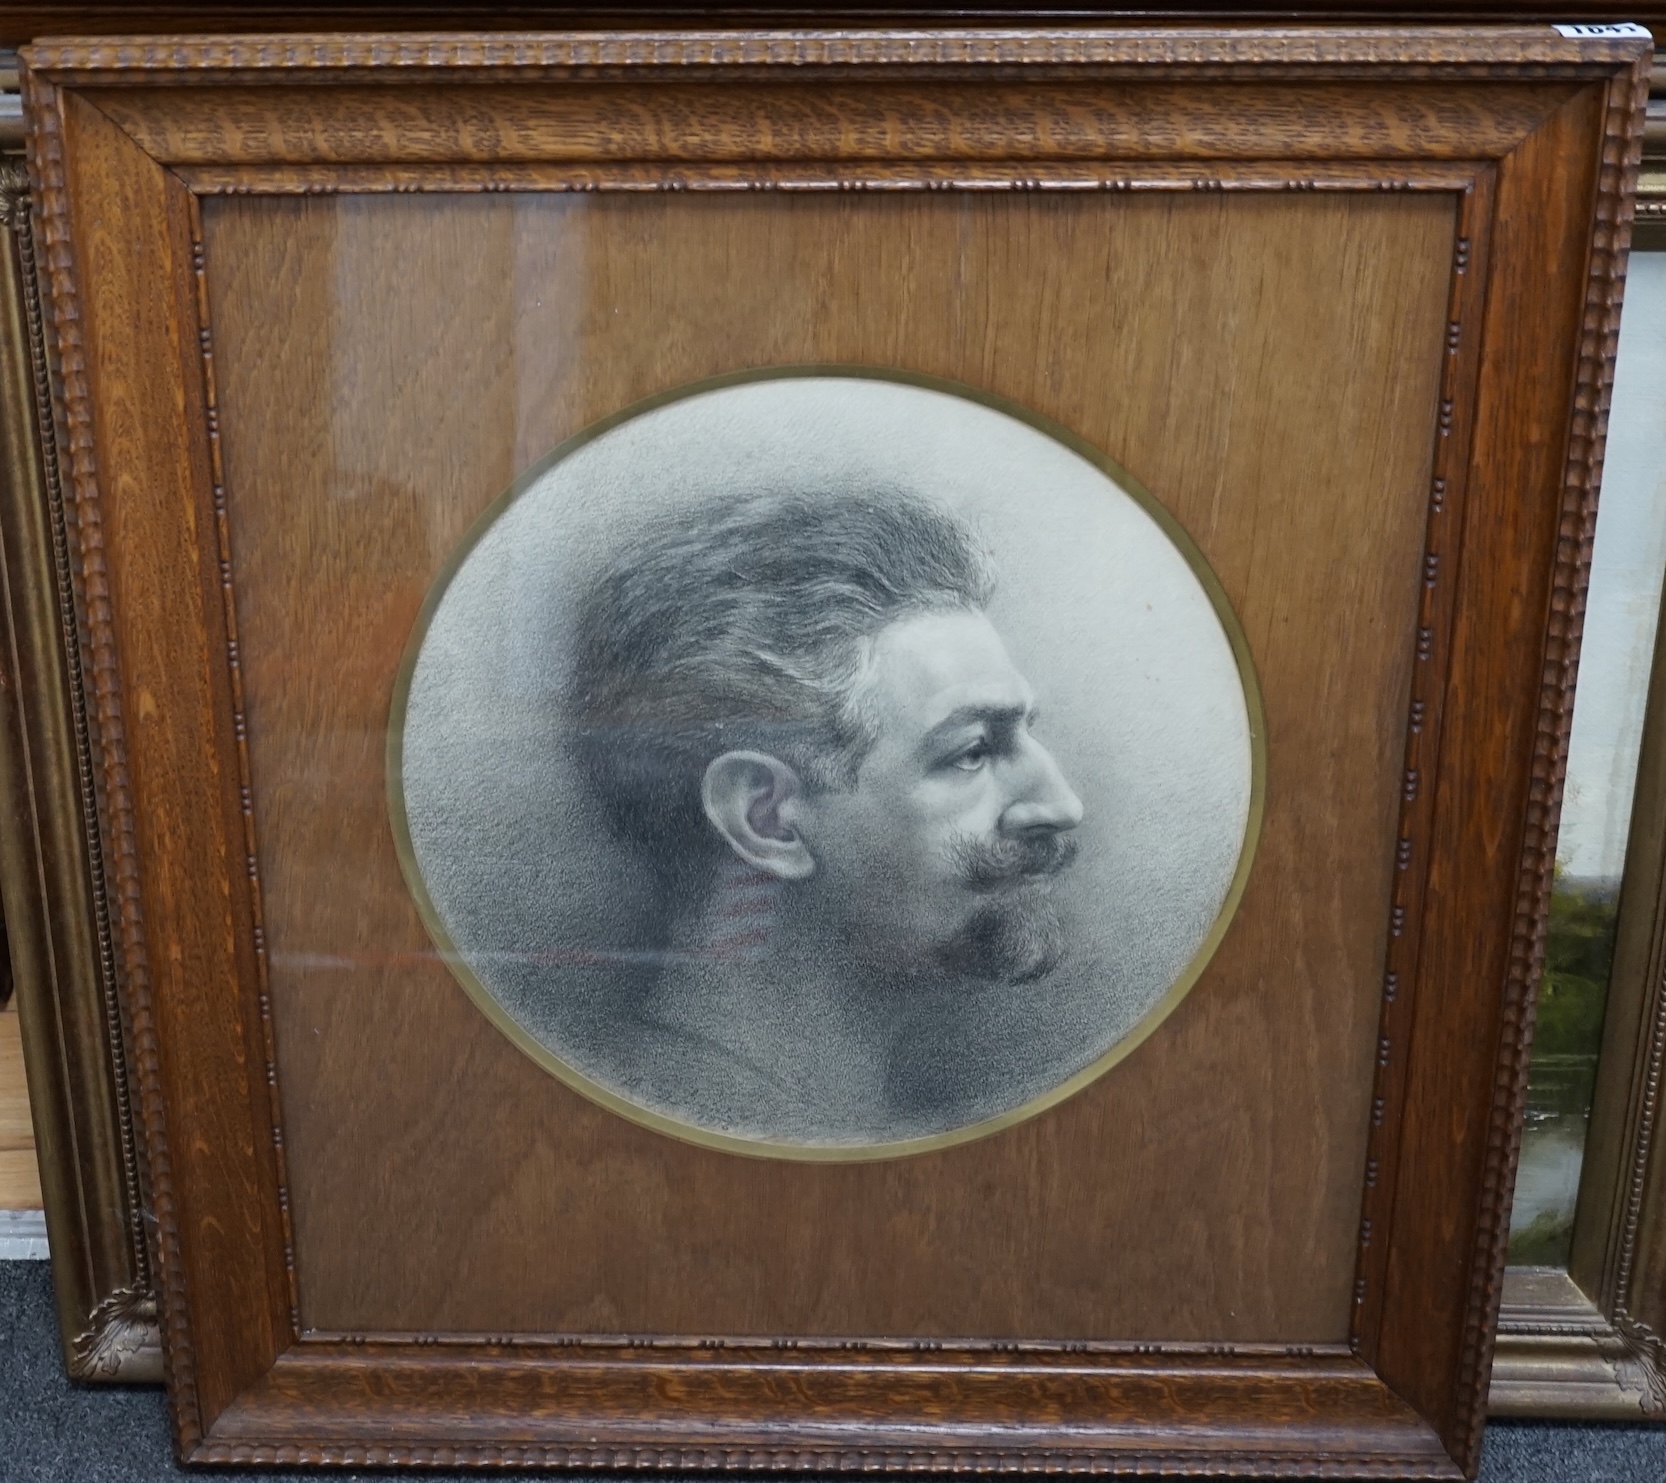 Early 20th century, charcoal, Portrait of Godefroid DeVreese (Belgian, 1861-1941), tondo, indistinctly signed and dated 1916, H. De Lau, Icelles label verso, 35cm diameter. Condition - fair, a few minor spots of foxing